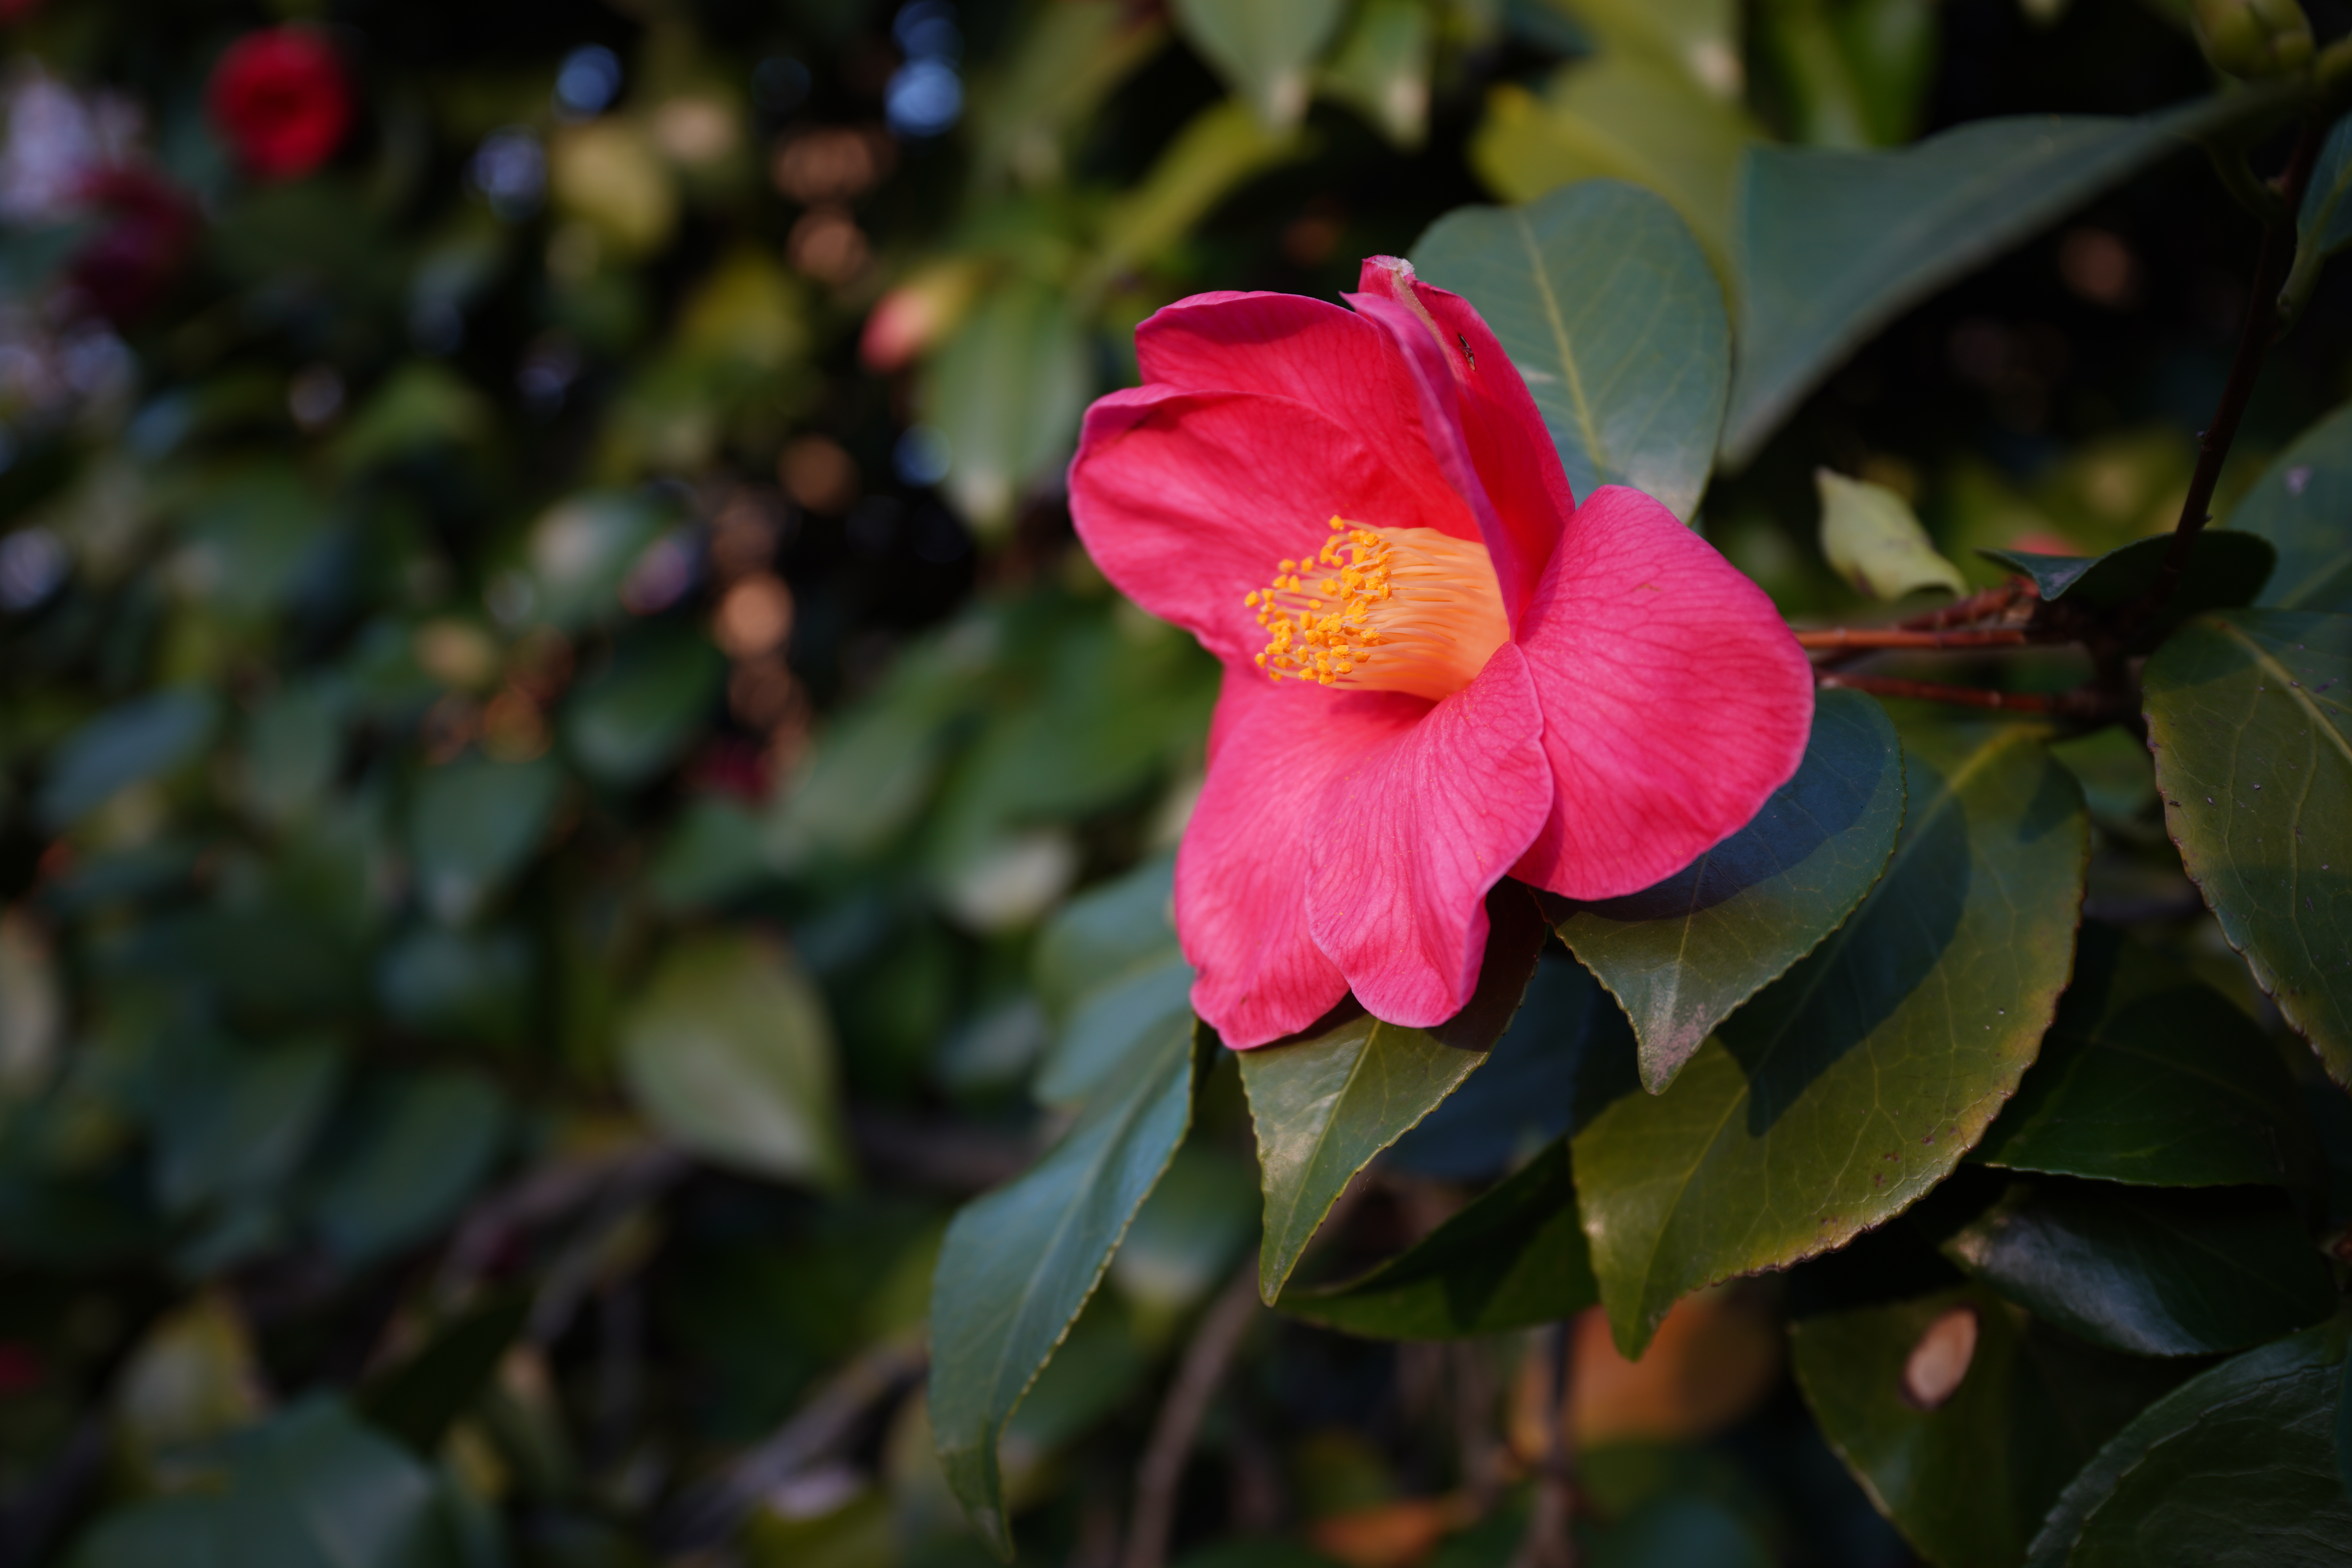 Sony FE 16-35mm F4 G close-up sample image